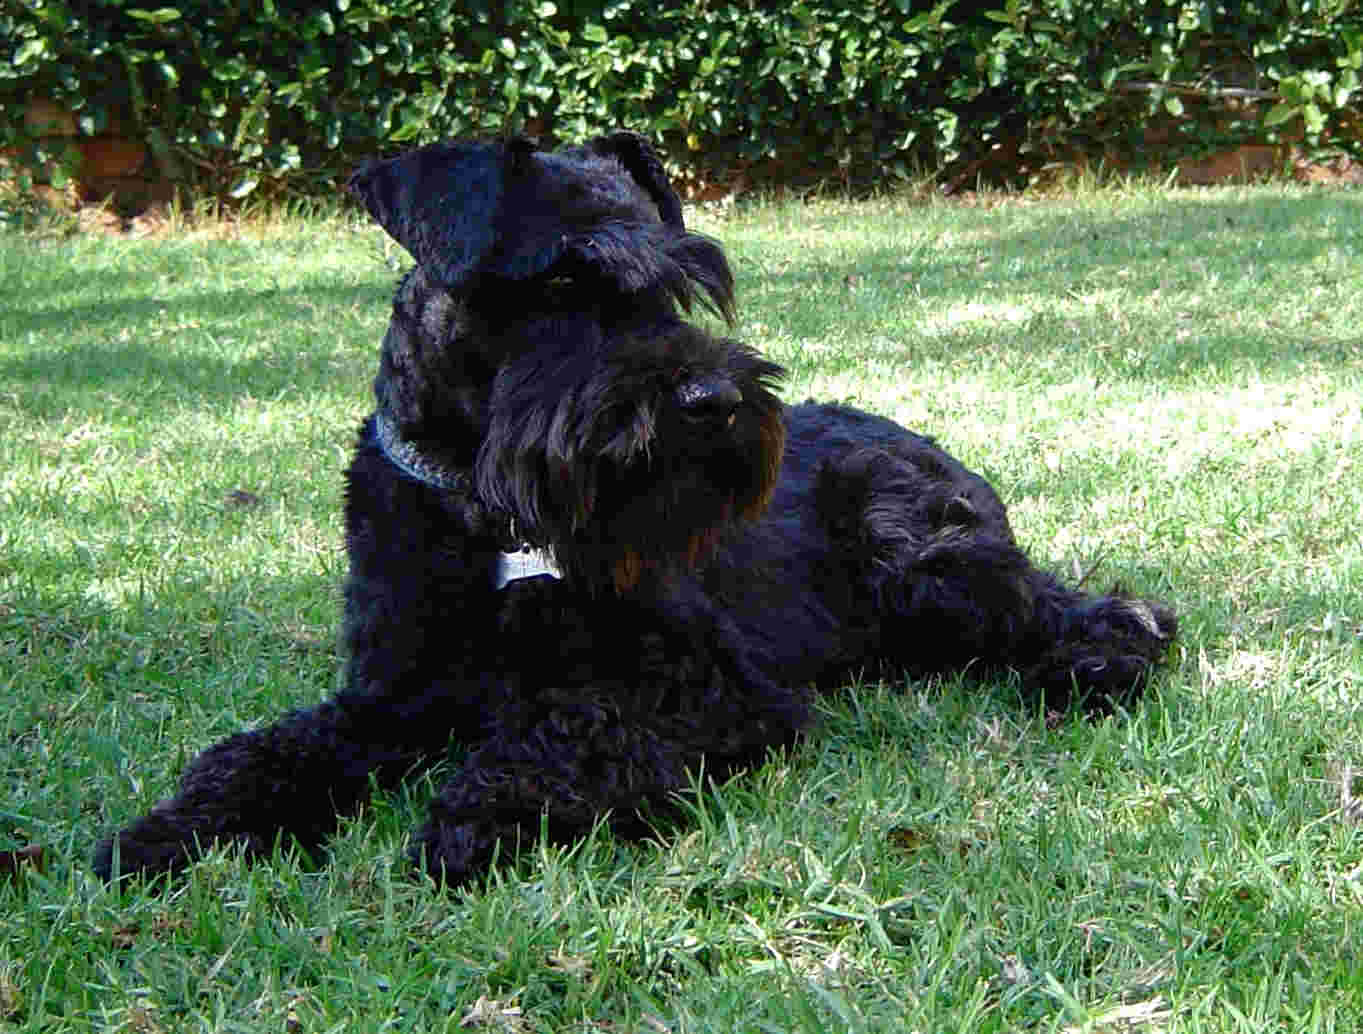 Miniature Schnauzer on the grass photo and wallpaper